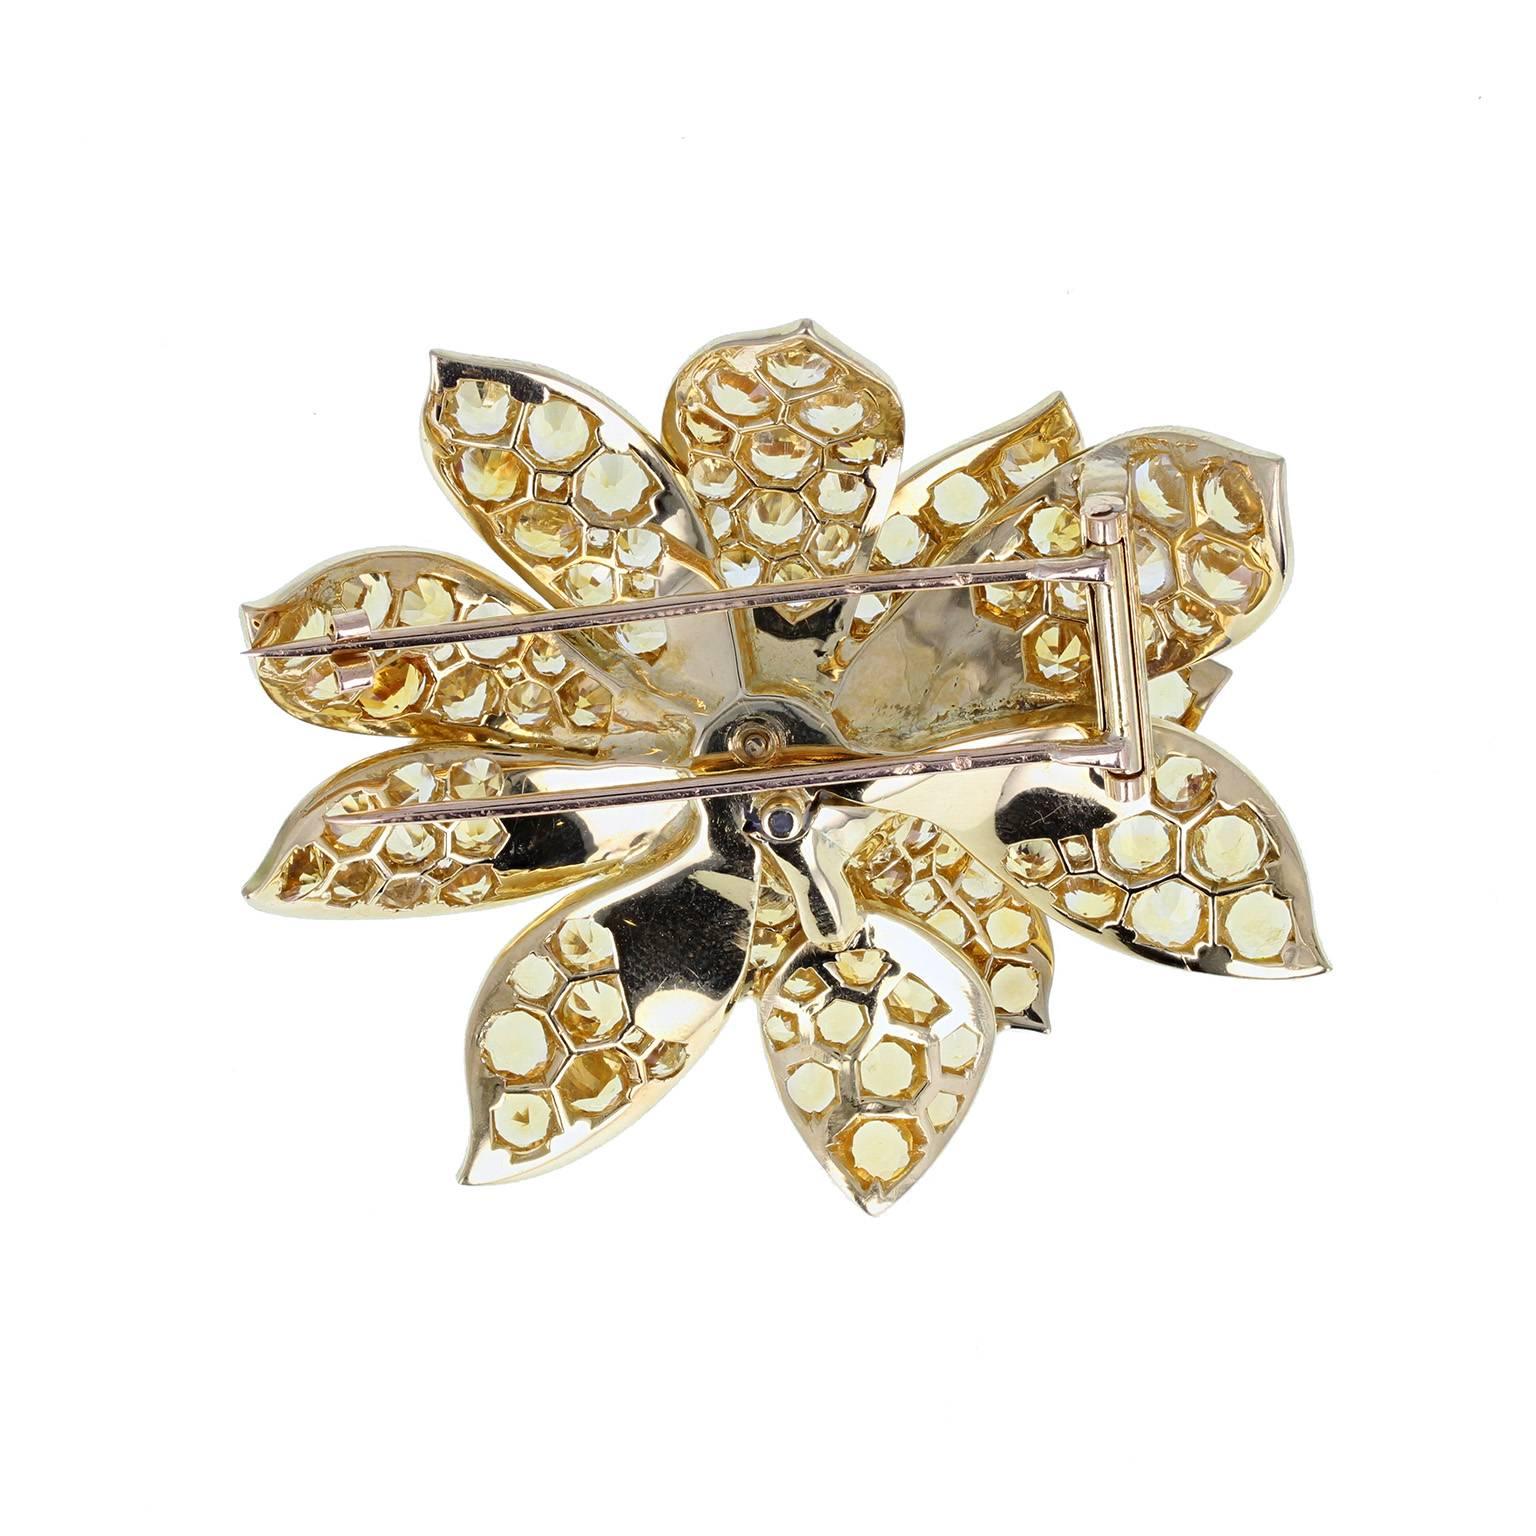 A fine and impressive brooch fashioned as a blossoming flower, pave set with round, brilliant-cut citrines. High quality and beautifully formed. French assay marks.
 
Setting
Tests as 18 carat gold
 
Citrine
Weight: 13.00 carats
